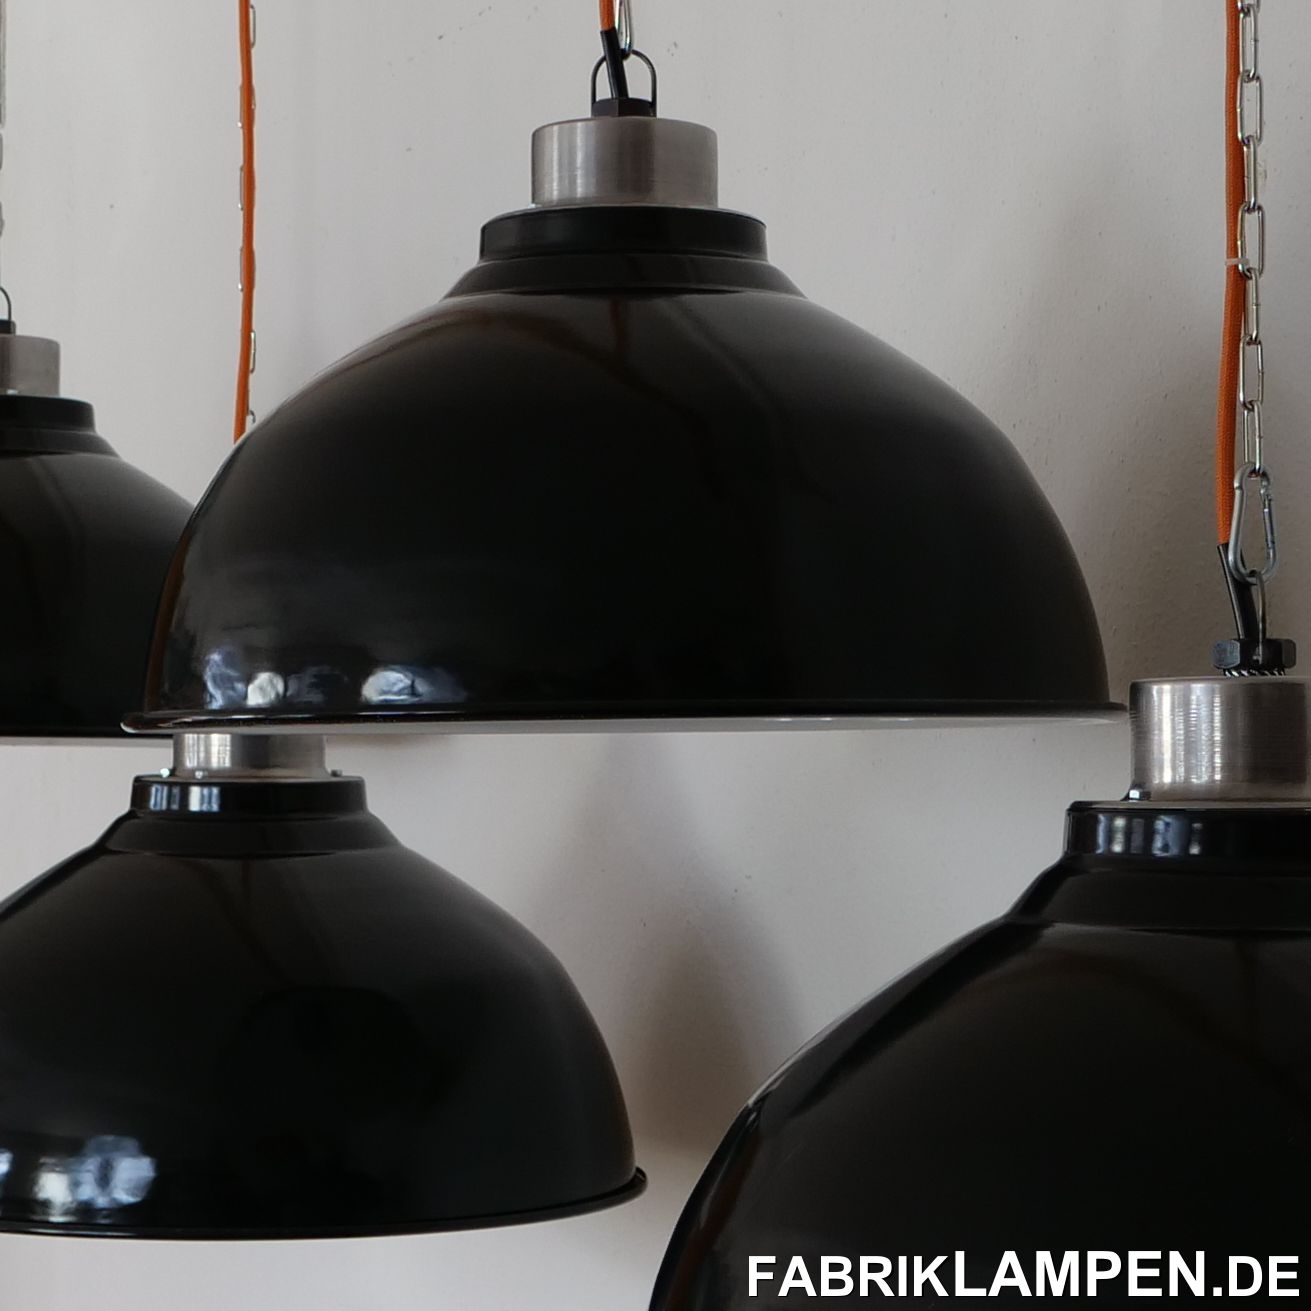  Old black industrial lamps with a very large enamel shade.These old large enamel lamps come from France and are among the last enamel lamps that were made - back then.These beautiful factory lamps have the usual traces of the past decades such as chipping, scratches, discoloration, etc. They have been restored: cleaned, preserved and re-electrified, with new E27 ceramic sockets.Material: black (white inside) enameled sheet steel, top made of non-enameled steel.The dimensions: height of the lamps approx. 33.5 cm (13,2 inches, without hanging loop), diameter approx. 53 cm (20,9 inches). The diameter is very large, but the height of the lamp is relatively low: they are also suitable for rooms with normal interior height (above tables, counters, etc.).The old industrial lamps are supplied with a 2 meter textile cable of your choice (other lengths are of course possible) and a solid hanging loop for safe hanging. The lamps can also be supplied with chain or tubular steel suspension for an additional charge. We can also offer canopies. 